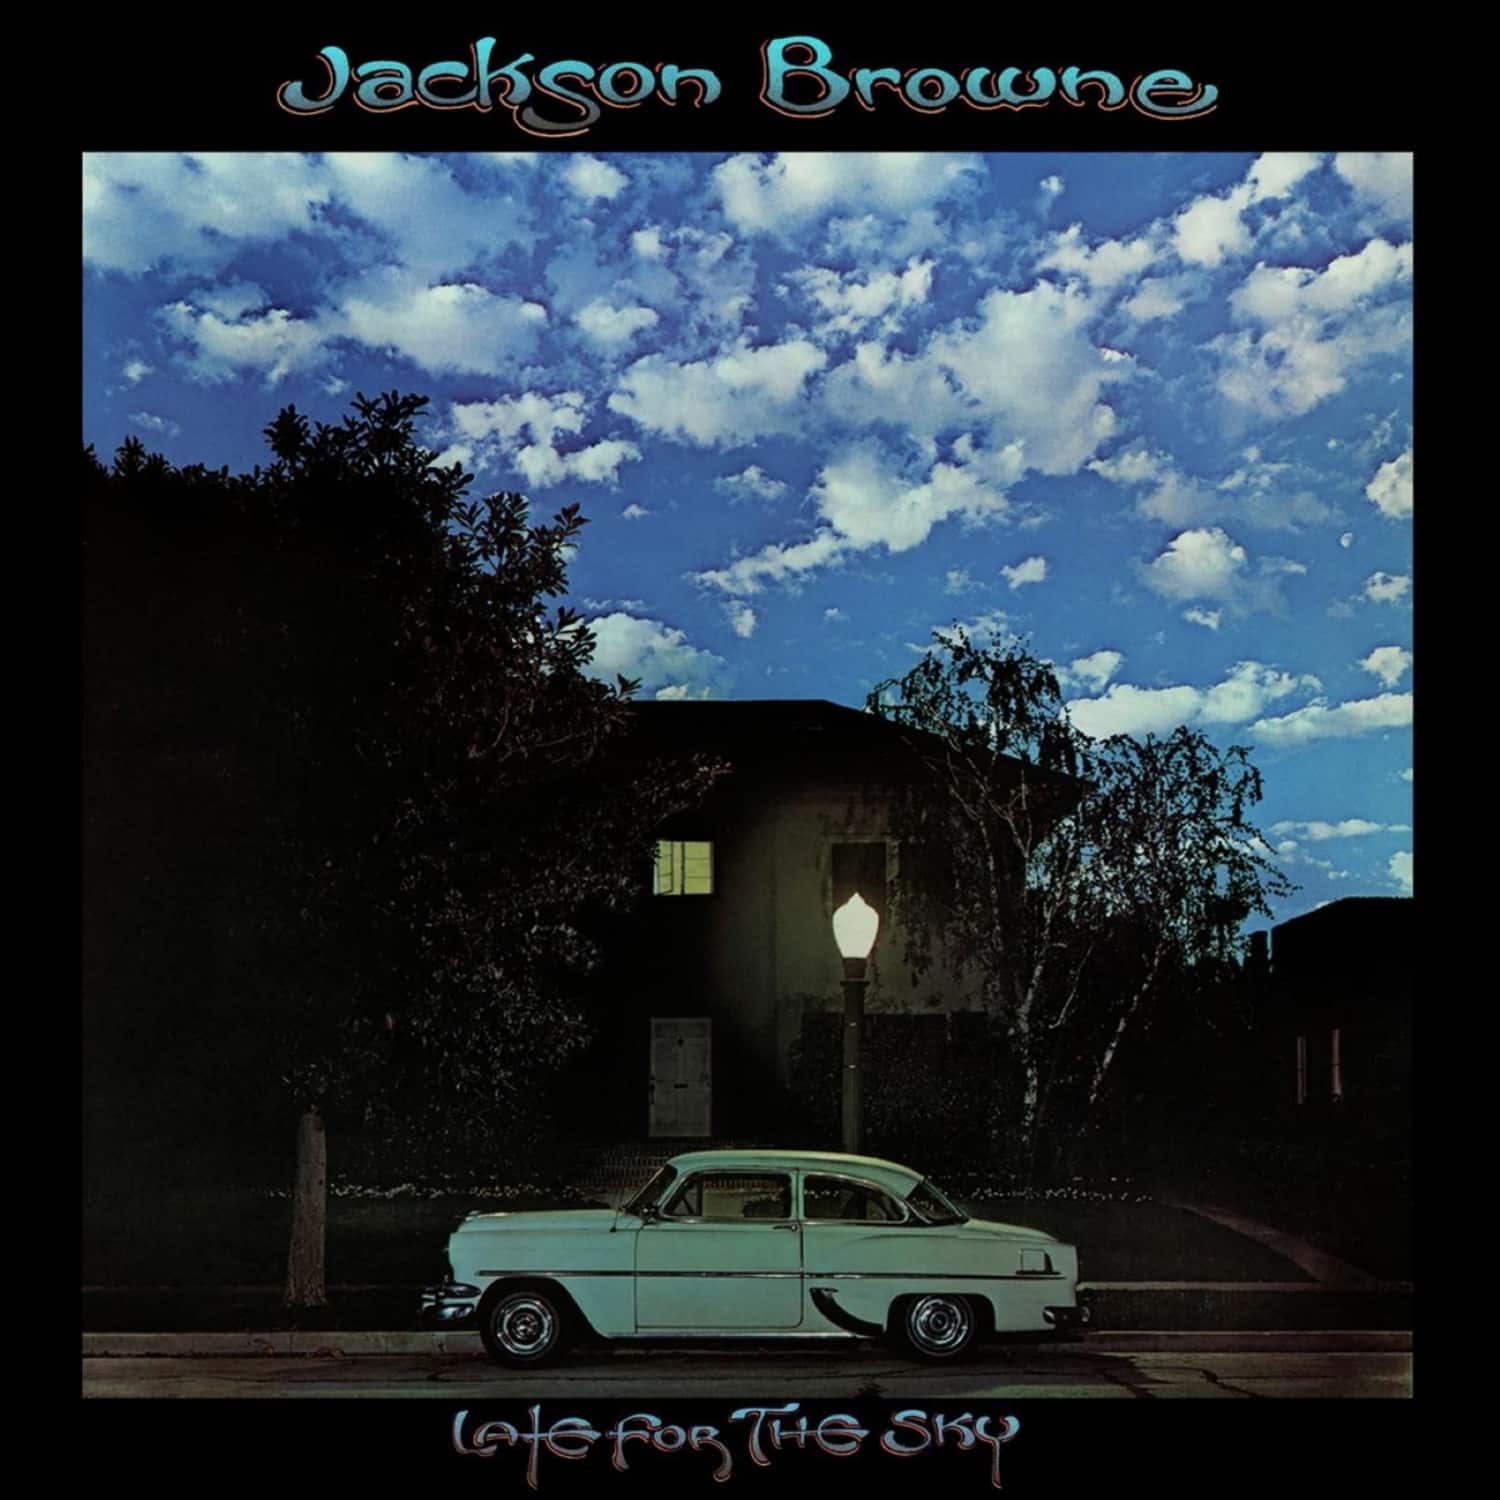  Jackson Browne - LATE FOR THE SKY 